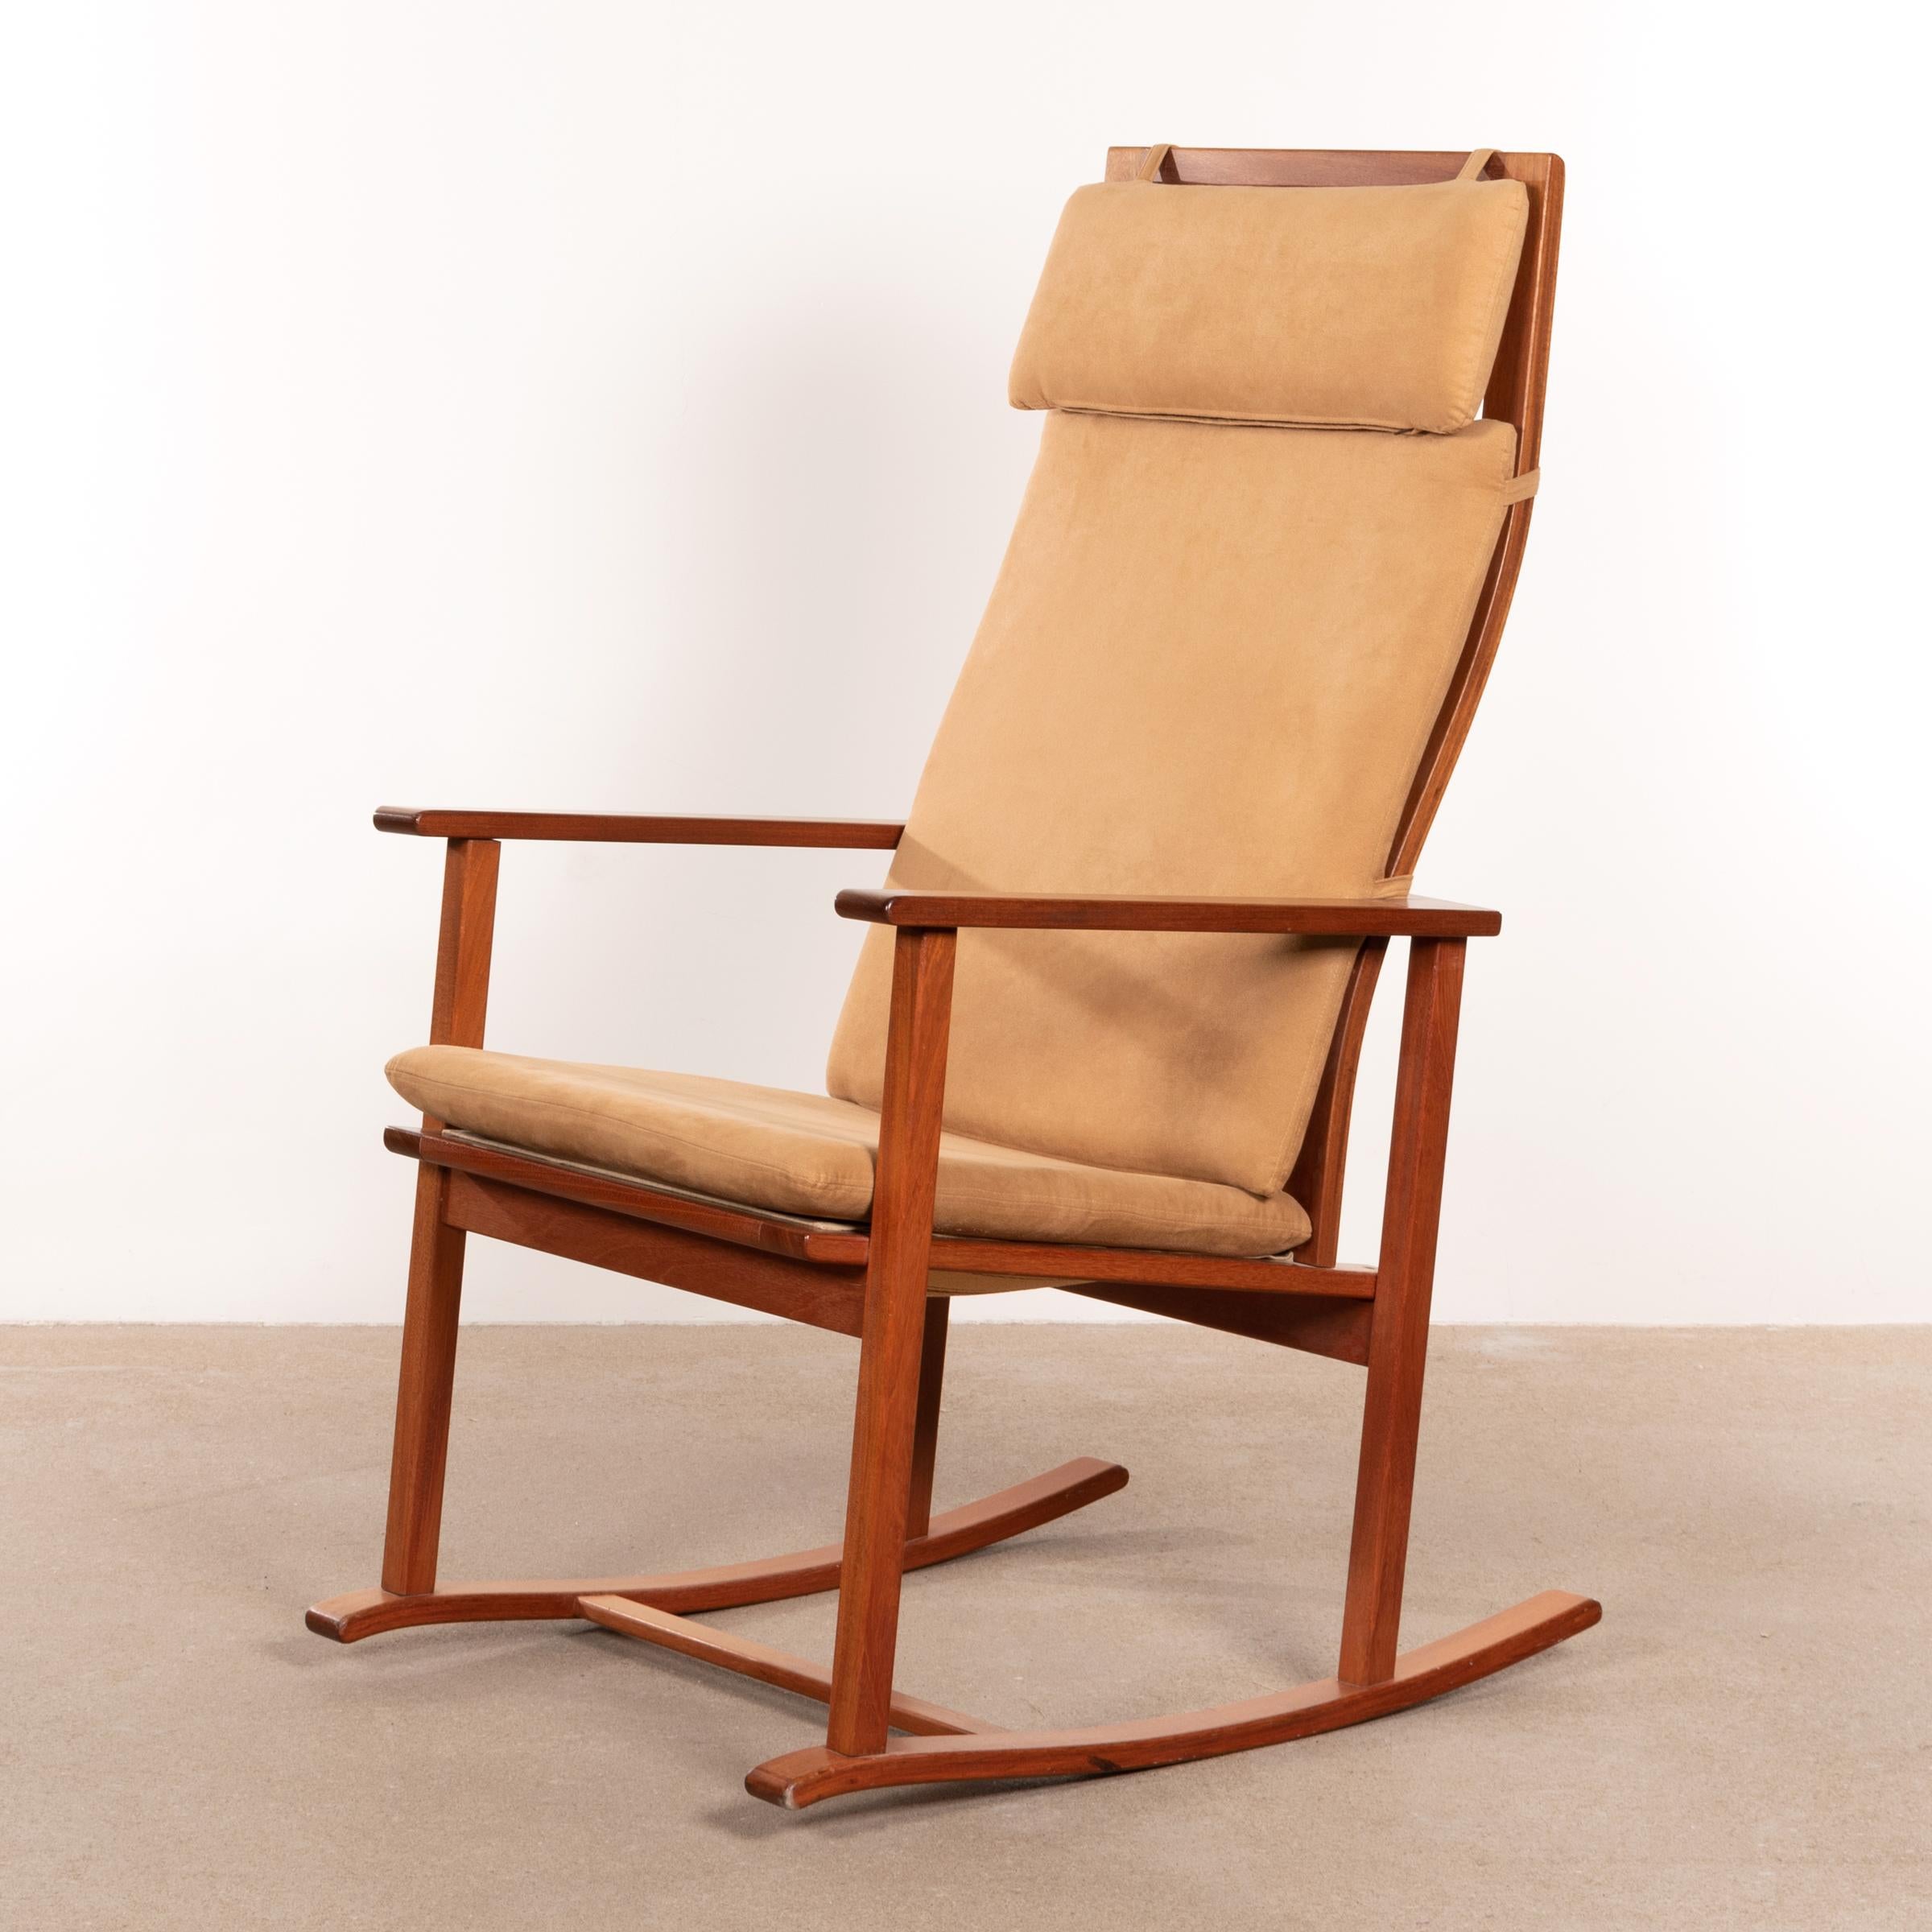 Elegant rocking chair (Model 2268) designed by Børge Mogensen for Fredericia Stølefabrik, Denmark. Solid teak wooden frame with loose cushions in Alcantara upholstery. All in very good condition with slight traces of use. Signed by manufacturer.